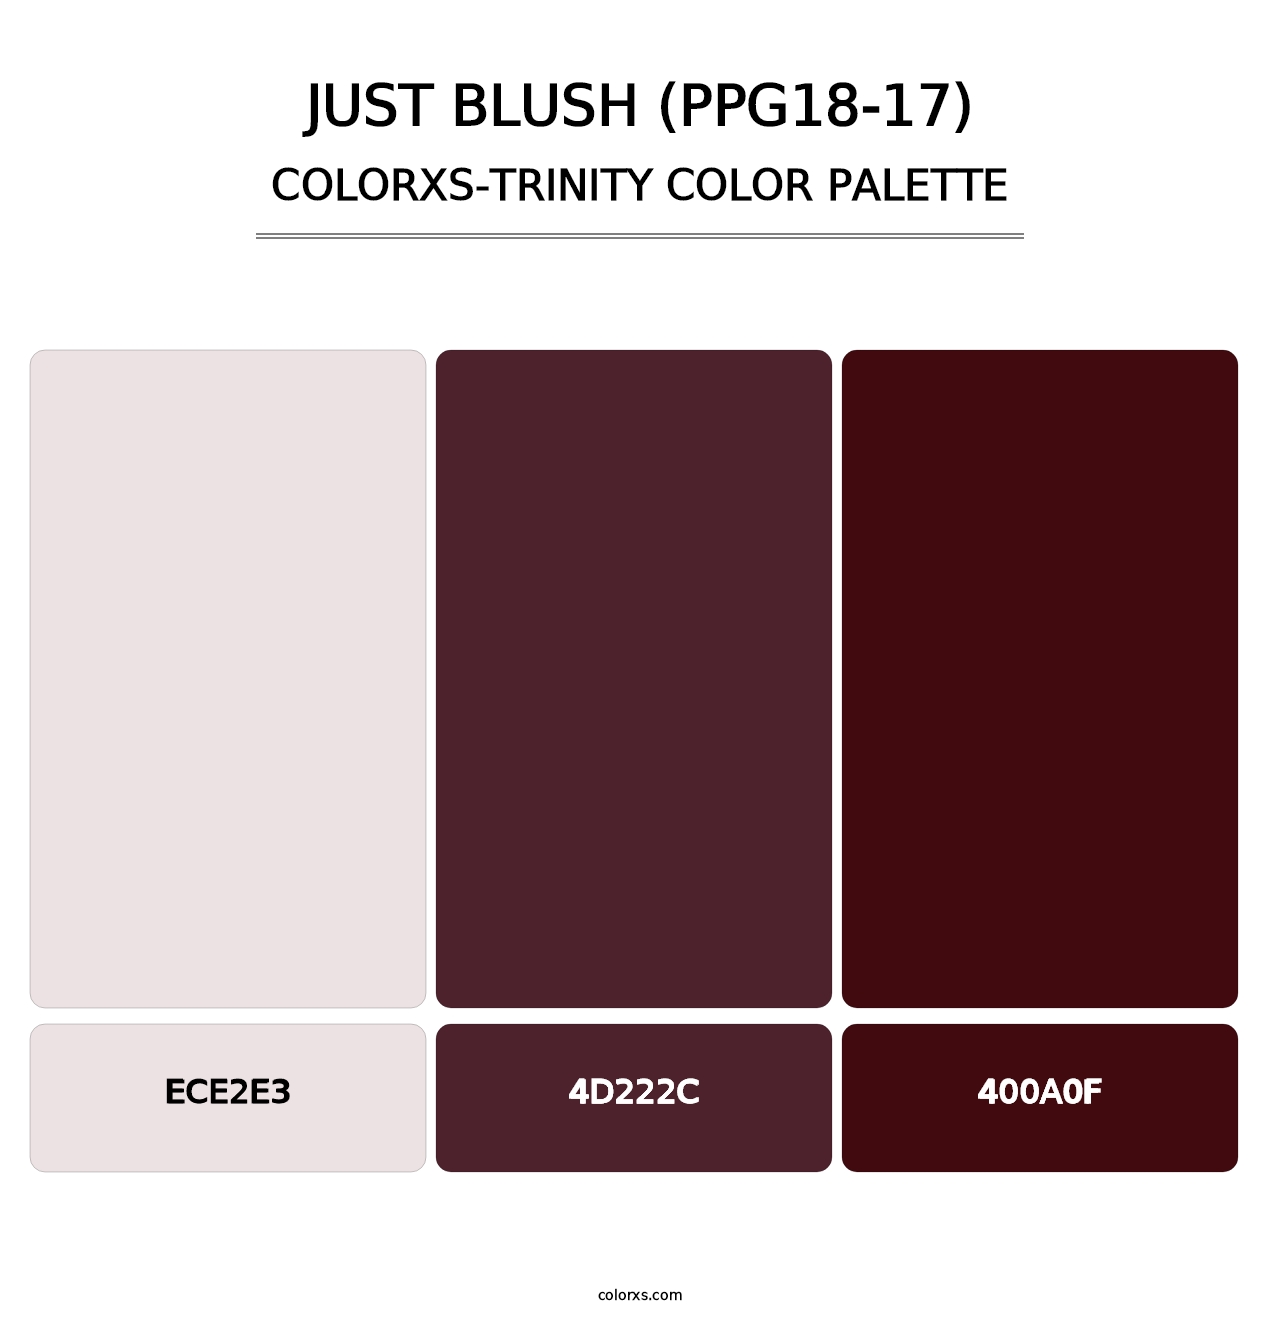 Just Blush (PPG18-17) - Colorxs Trinity Palette